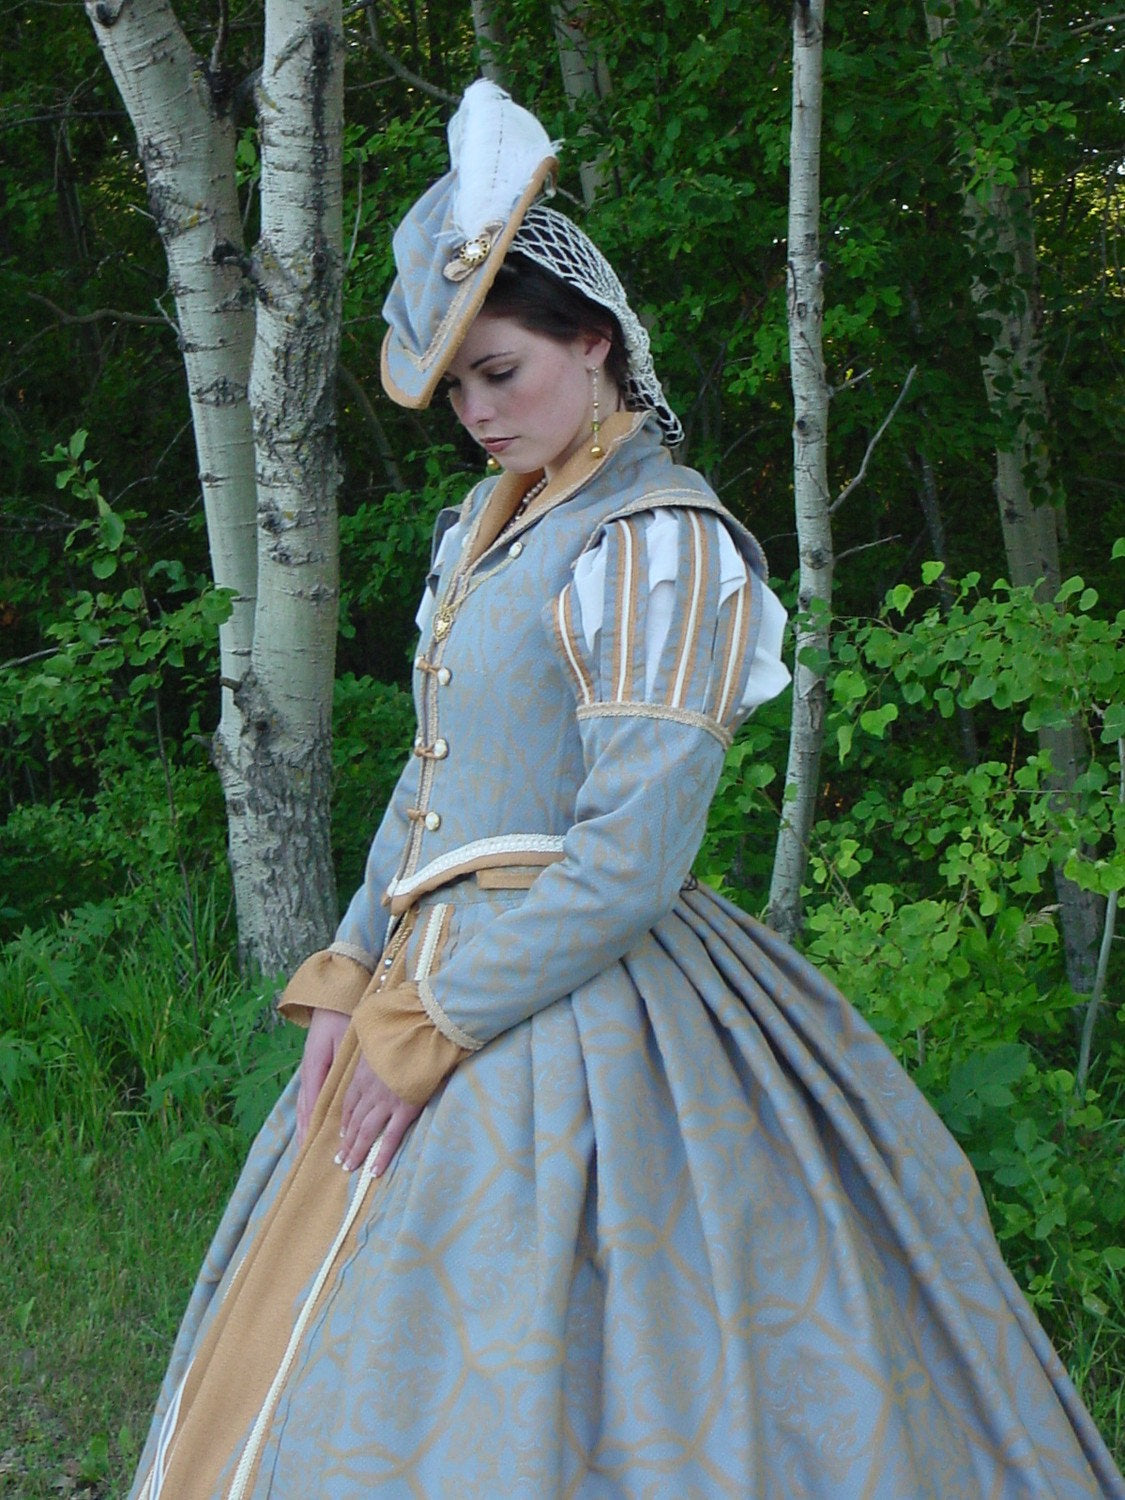 CUSTOM Tudor Court Renaissance High Collared Riding Dress Outfit Costume- 4 pieces include 2 skirts, jacket and hat